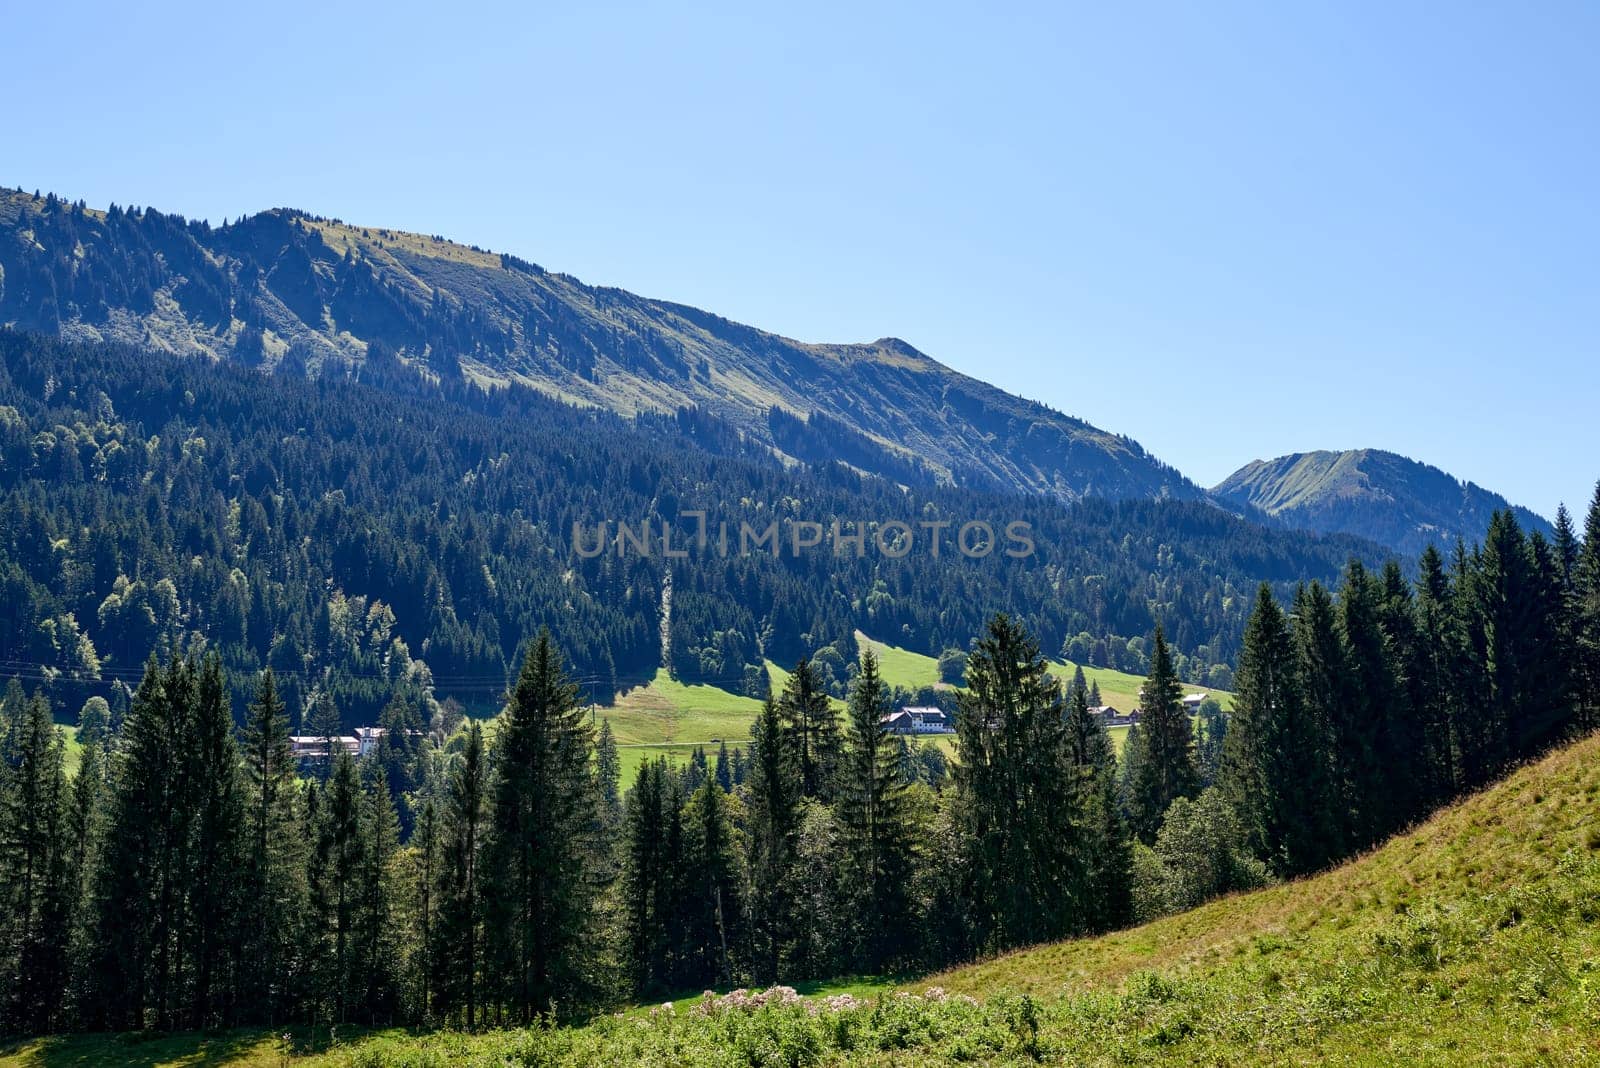 Alpine Meadows, Pine Forests, and the Azure Sky. Summer Meadows and Evergreen Forests Beneath Blue Skies. Mountain: Grazing Pastures and Pine-Laden Slopes in Summer. Nature Alpine Ecosystem Harmony Under a Canopy of Blue. Alpine Haven: Eco-Friendly Meadows and Fir-Adorned Slopes. by Andrii_Ko